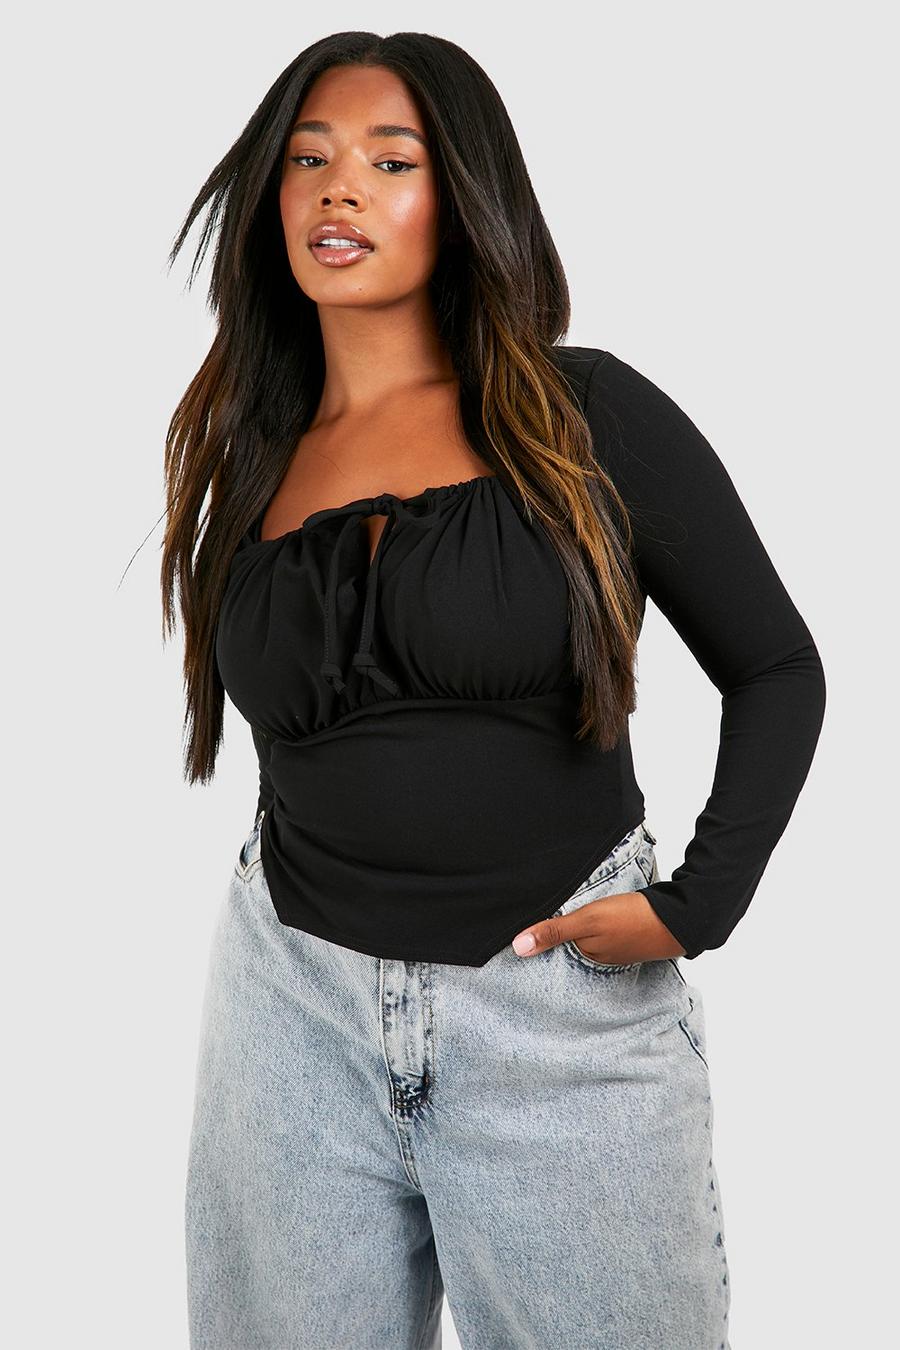 Black Corset Top Tops For Women Sexy Casual Plus Size Christmas